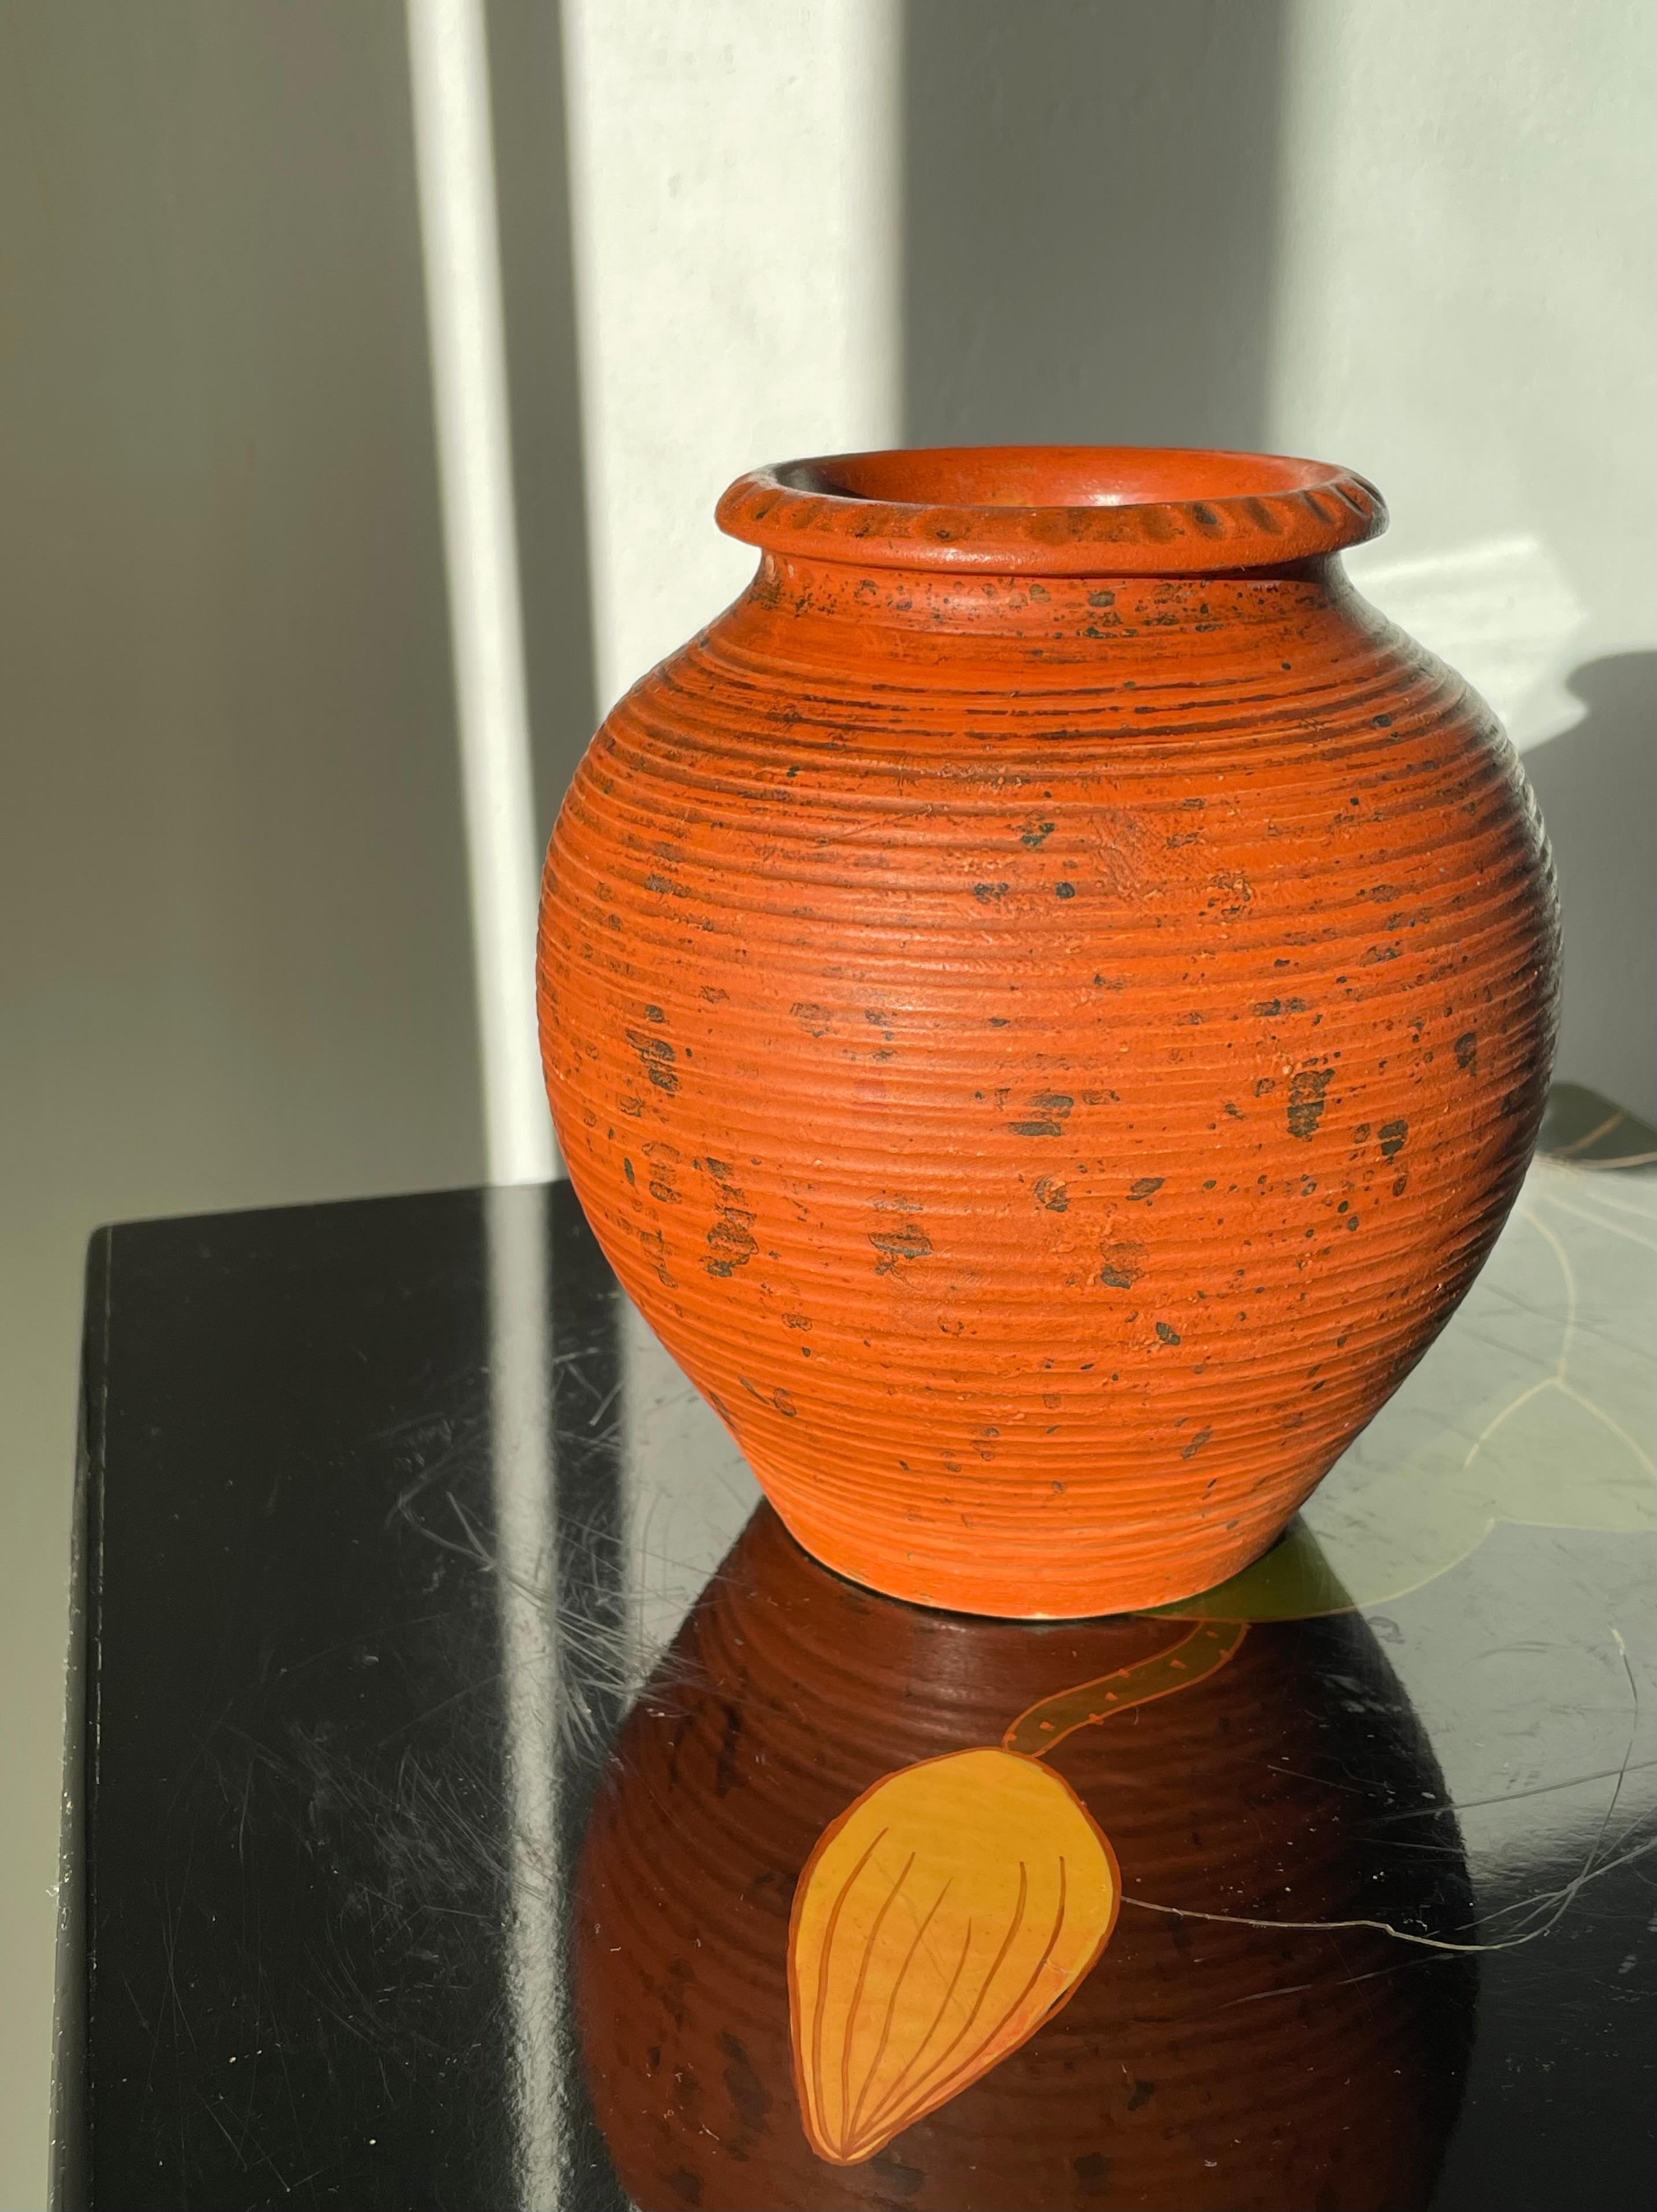 Antique 1920s hand-thrown ceramic art nouveau vase attributed to Knabstrup Keramik. Wavy edge with round indentations over the rustic, chubby belly with black speckled warm orange matte glaze. A handmade hundred year old item in beautiful vintage